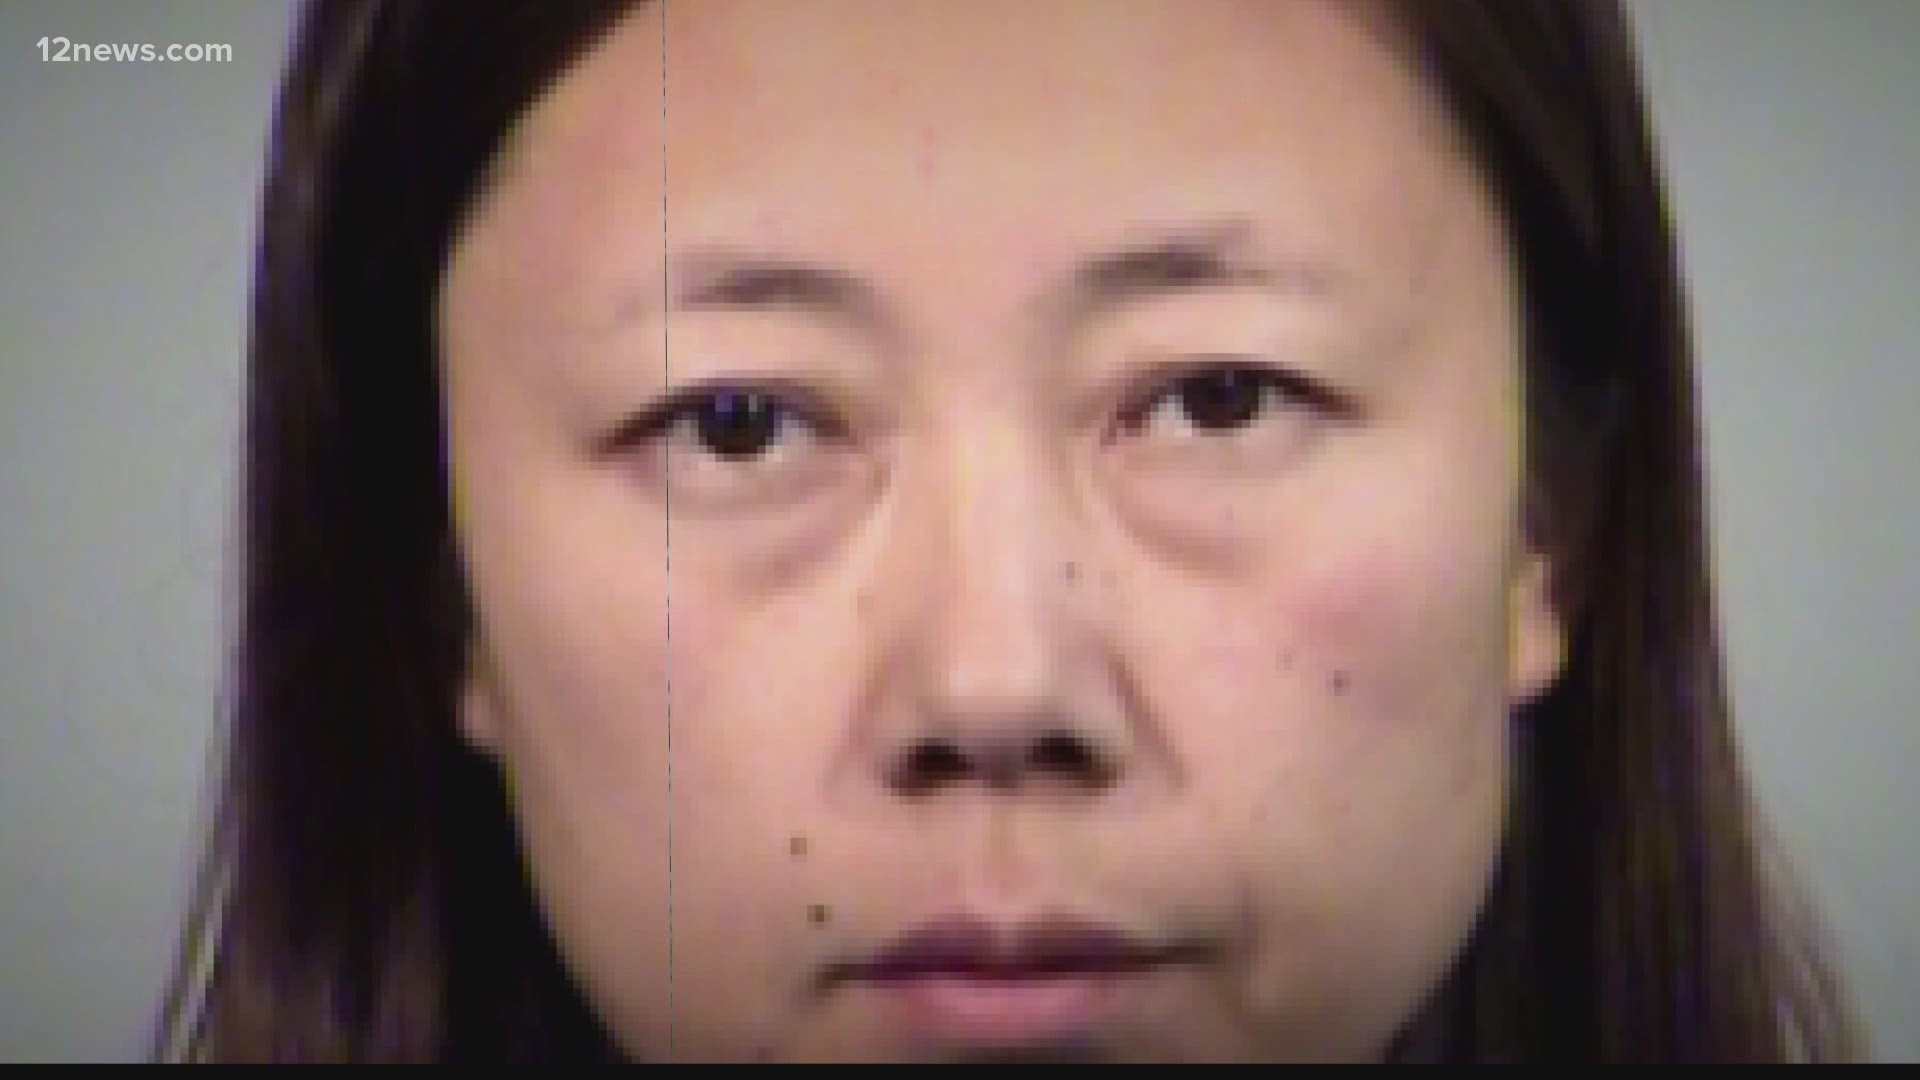 Tempe police say a woman told them she heard voices telling her to kill her two kids, but did not remember hurting them. A forensic psychologist weighs in.